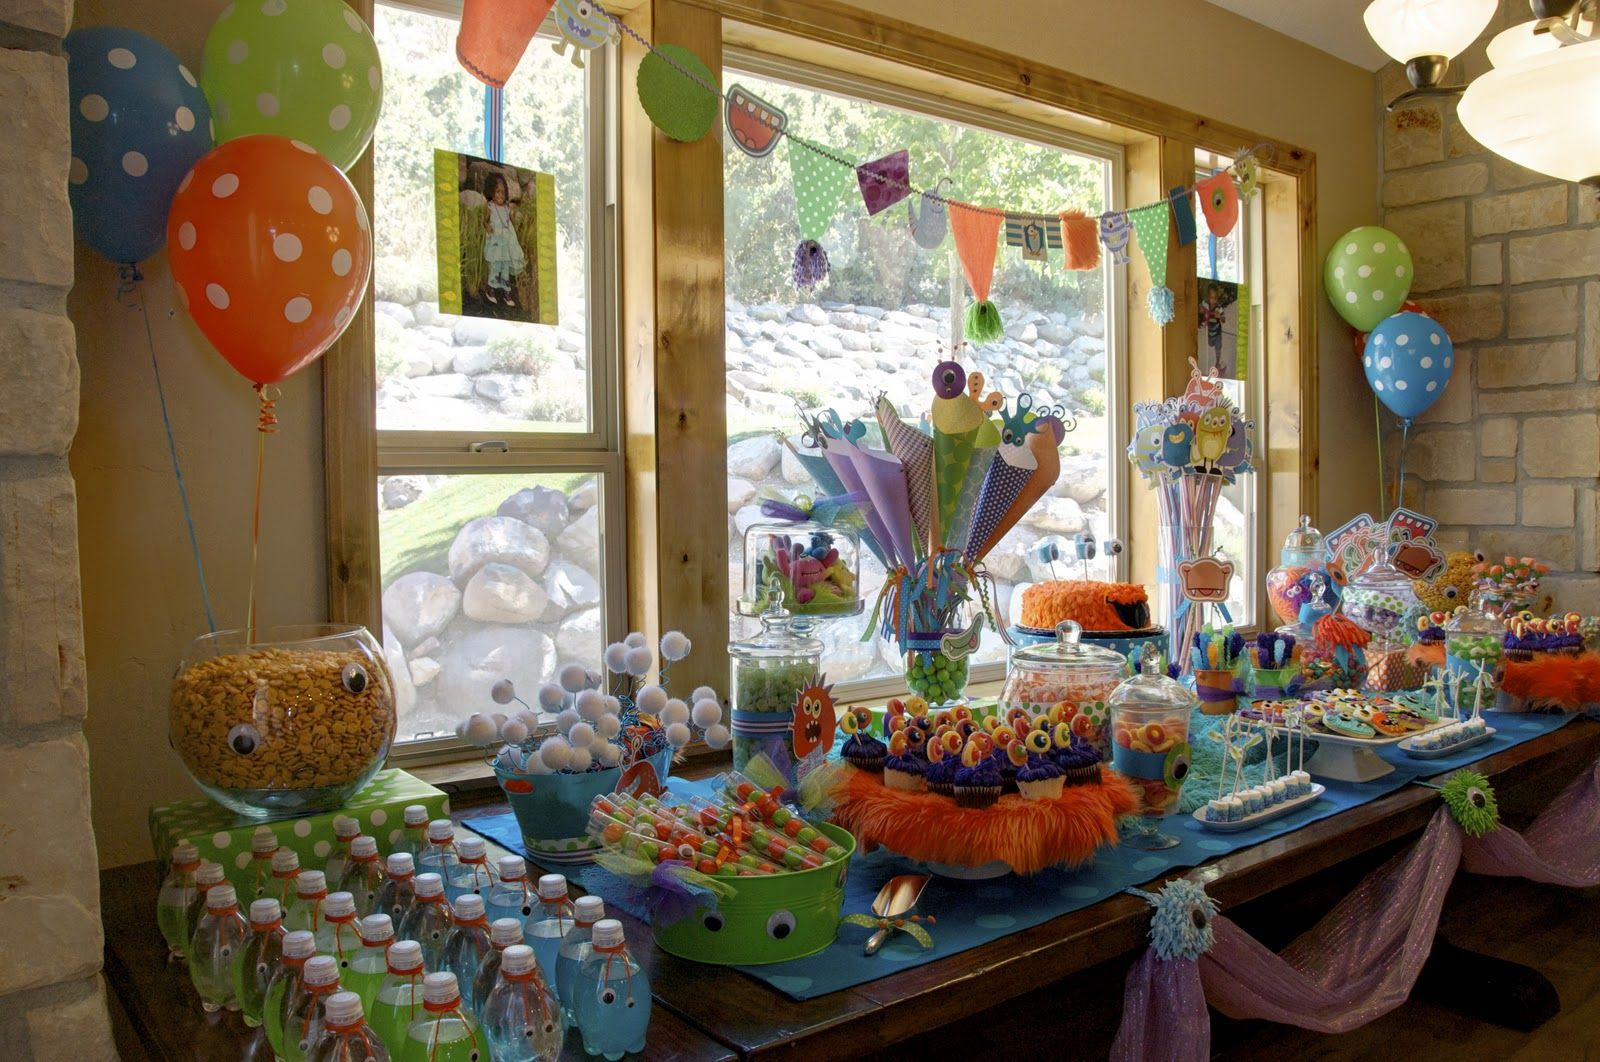 13 Year Old Birthday Party Ideas In The Winter
 My friends birthday is in the winter and she wanteâ Š